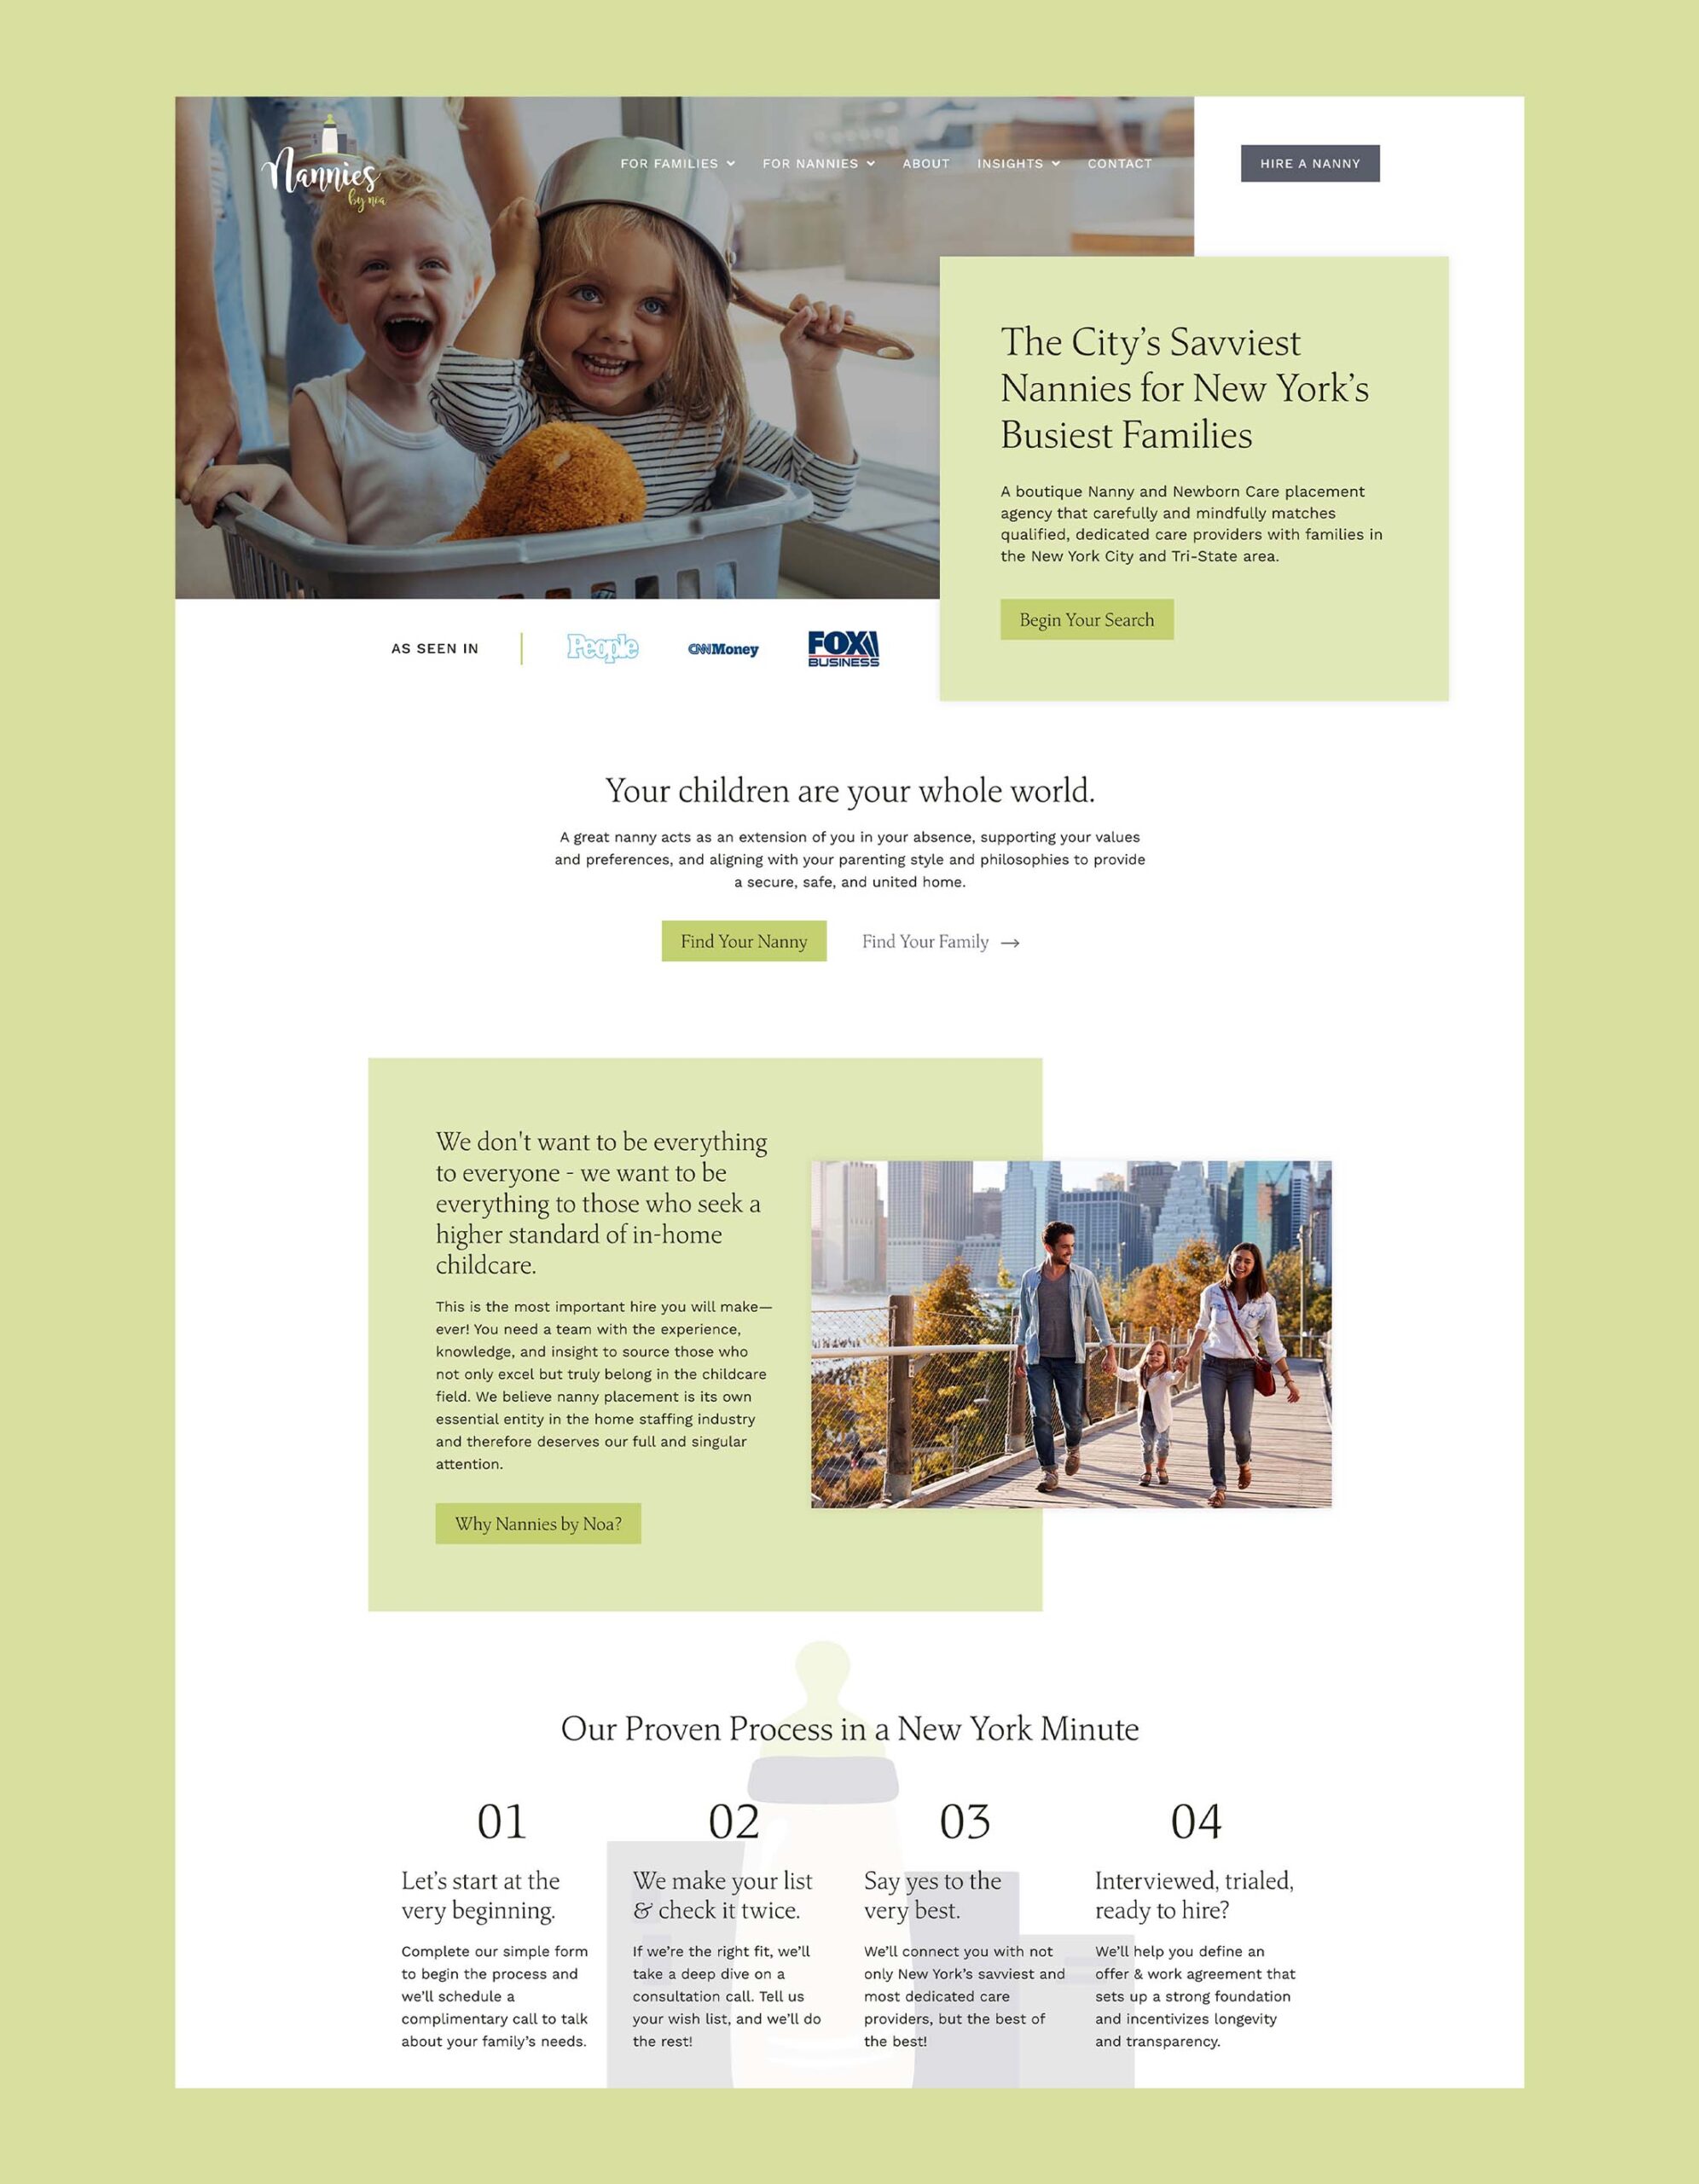 Website Design mockup for Nannies by Noa - Whiskey and Red Small Business Branding and Website Design Packages